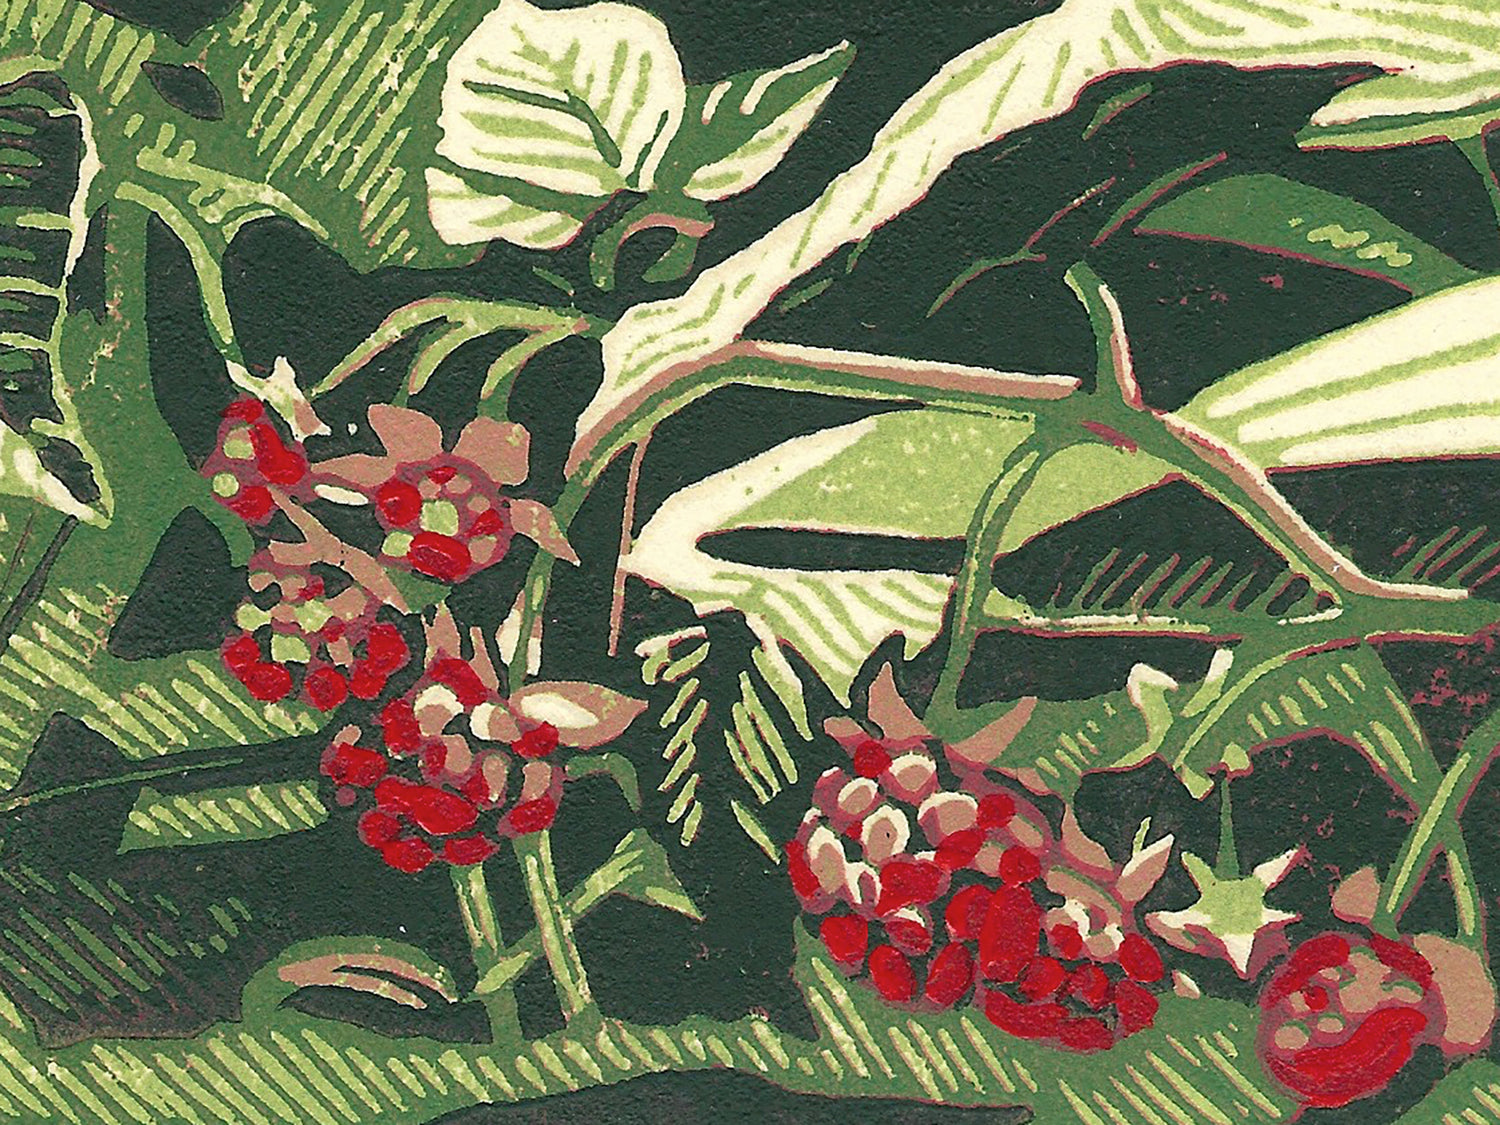 Wild Raspberries reduction block print featuring ripe red berries on a textured green vine.